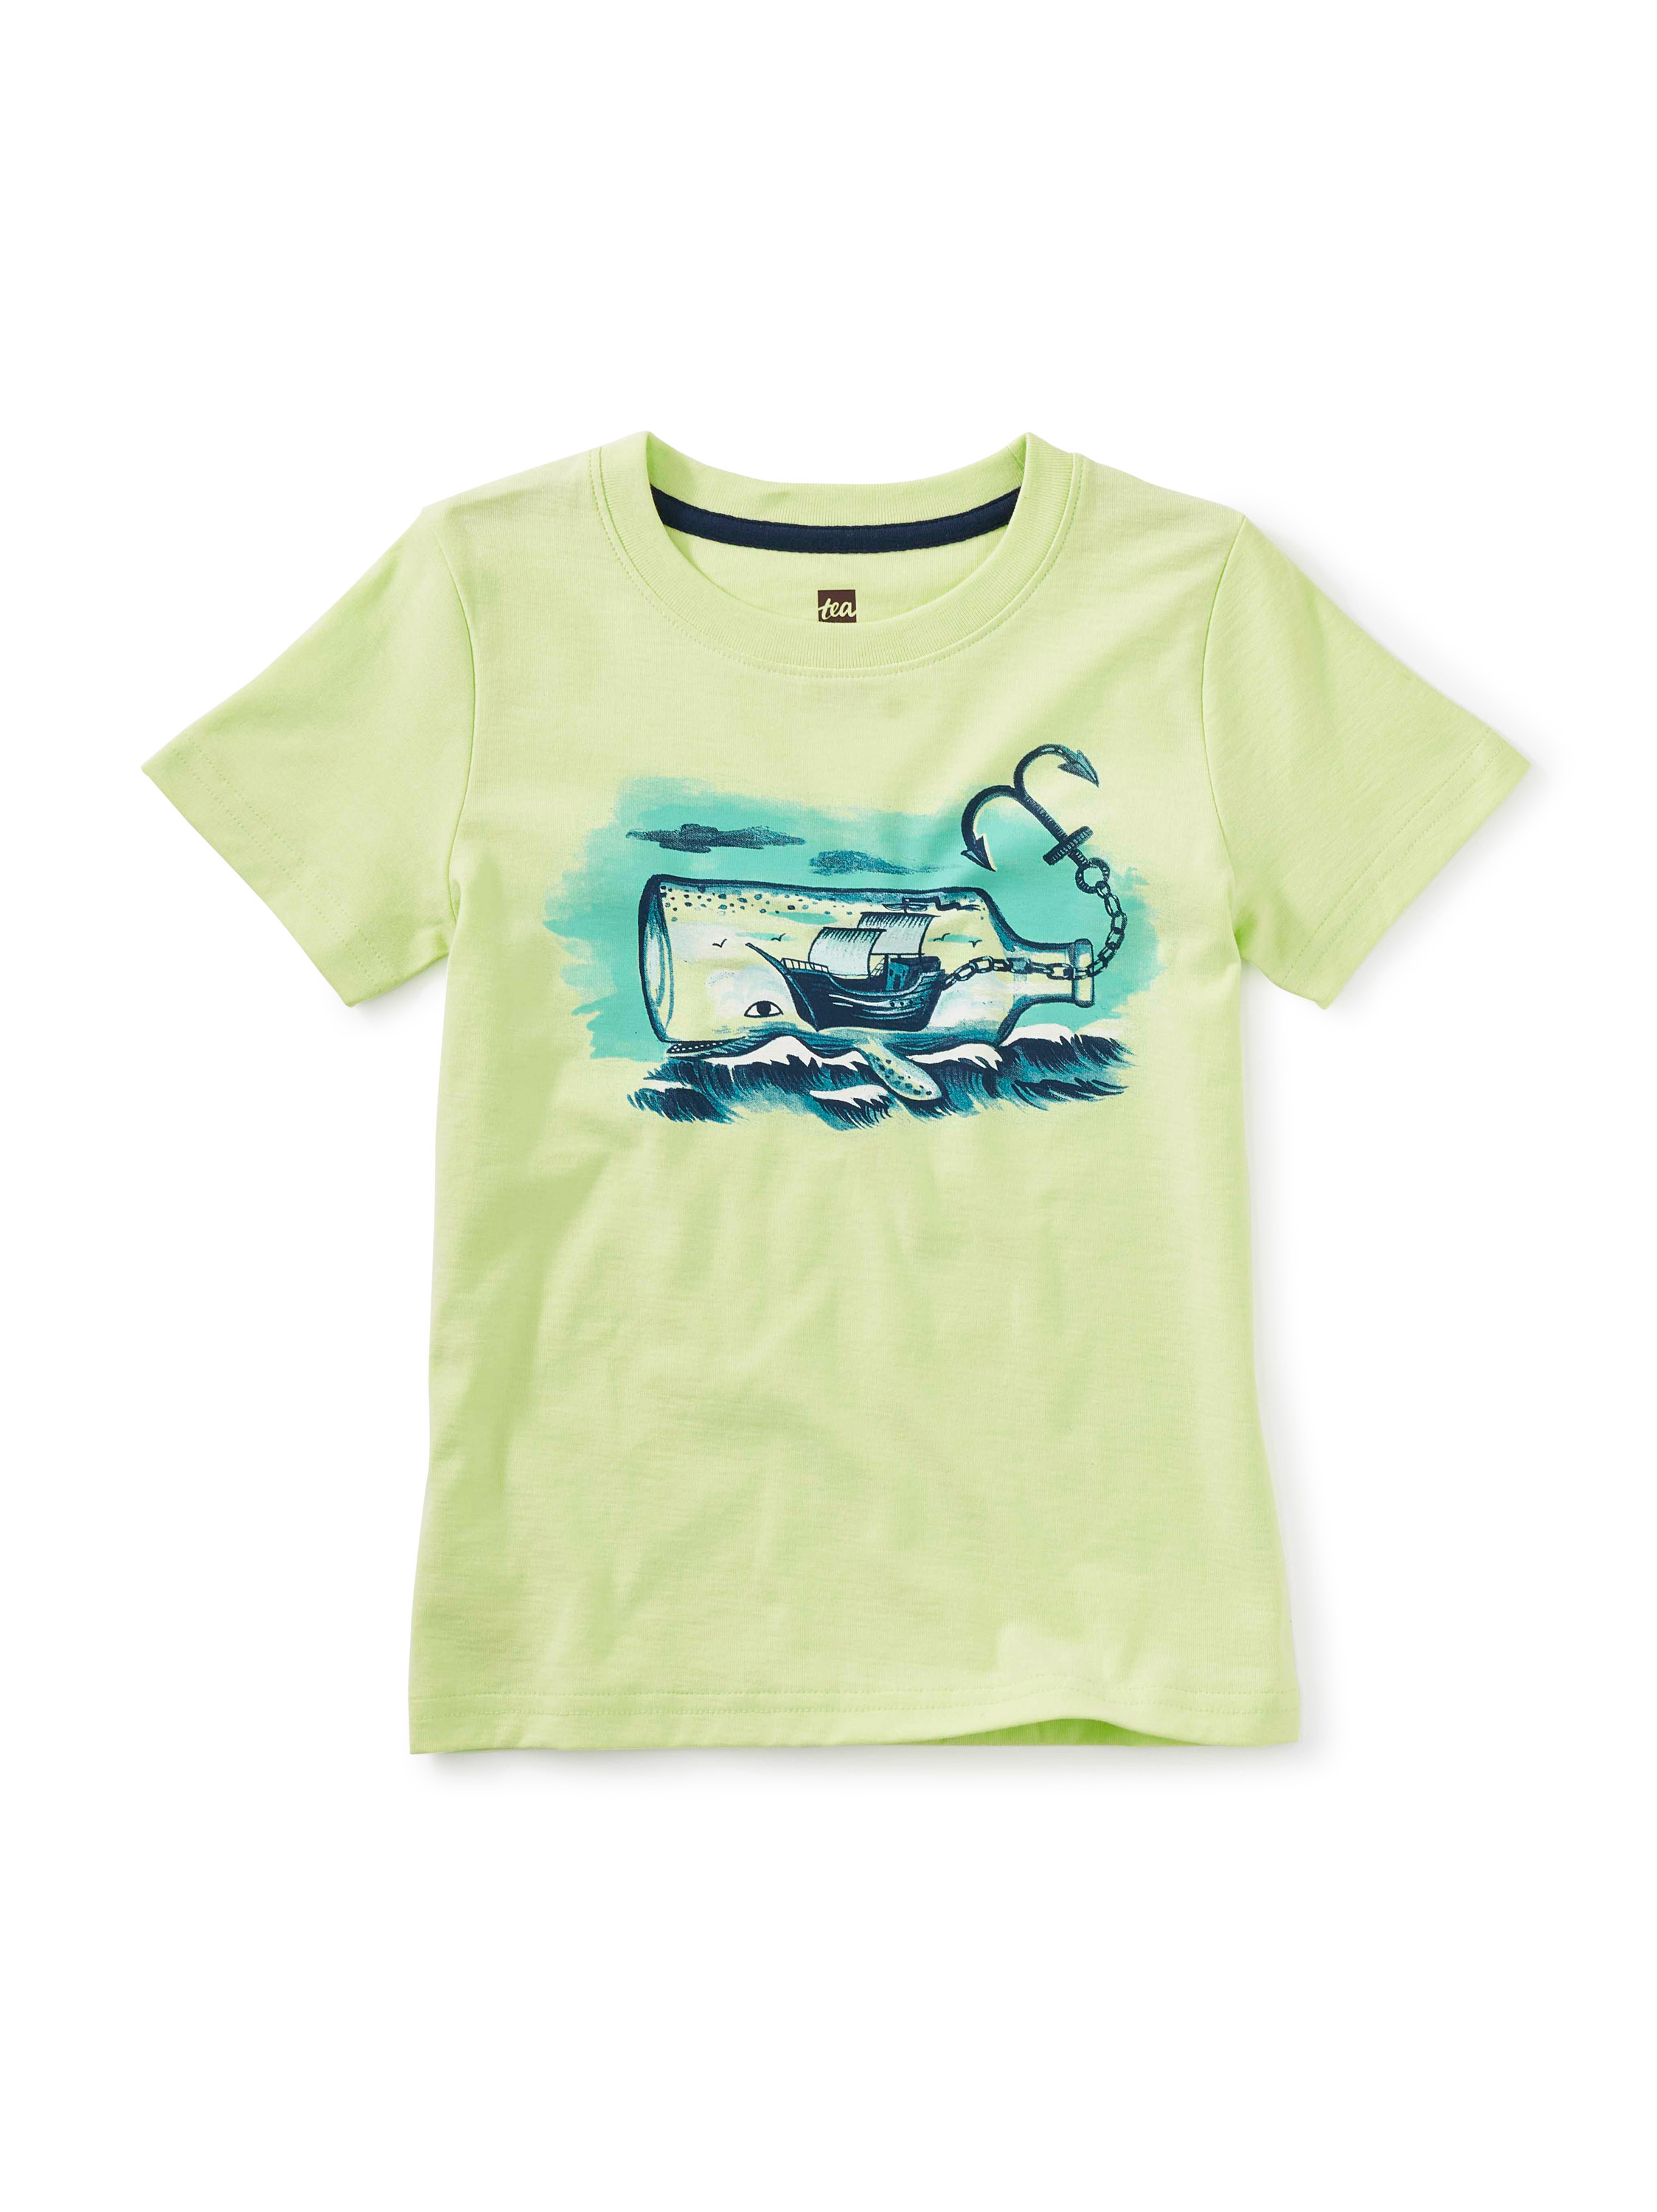 Ship in a Whale Bottle Tee | Tea Collection